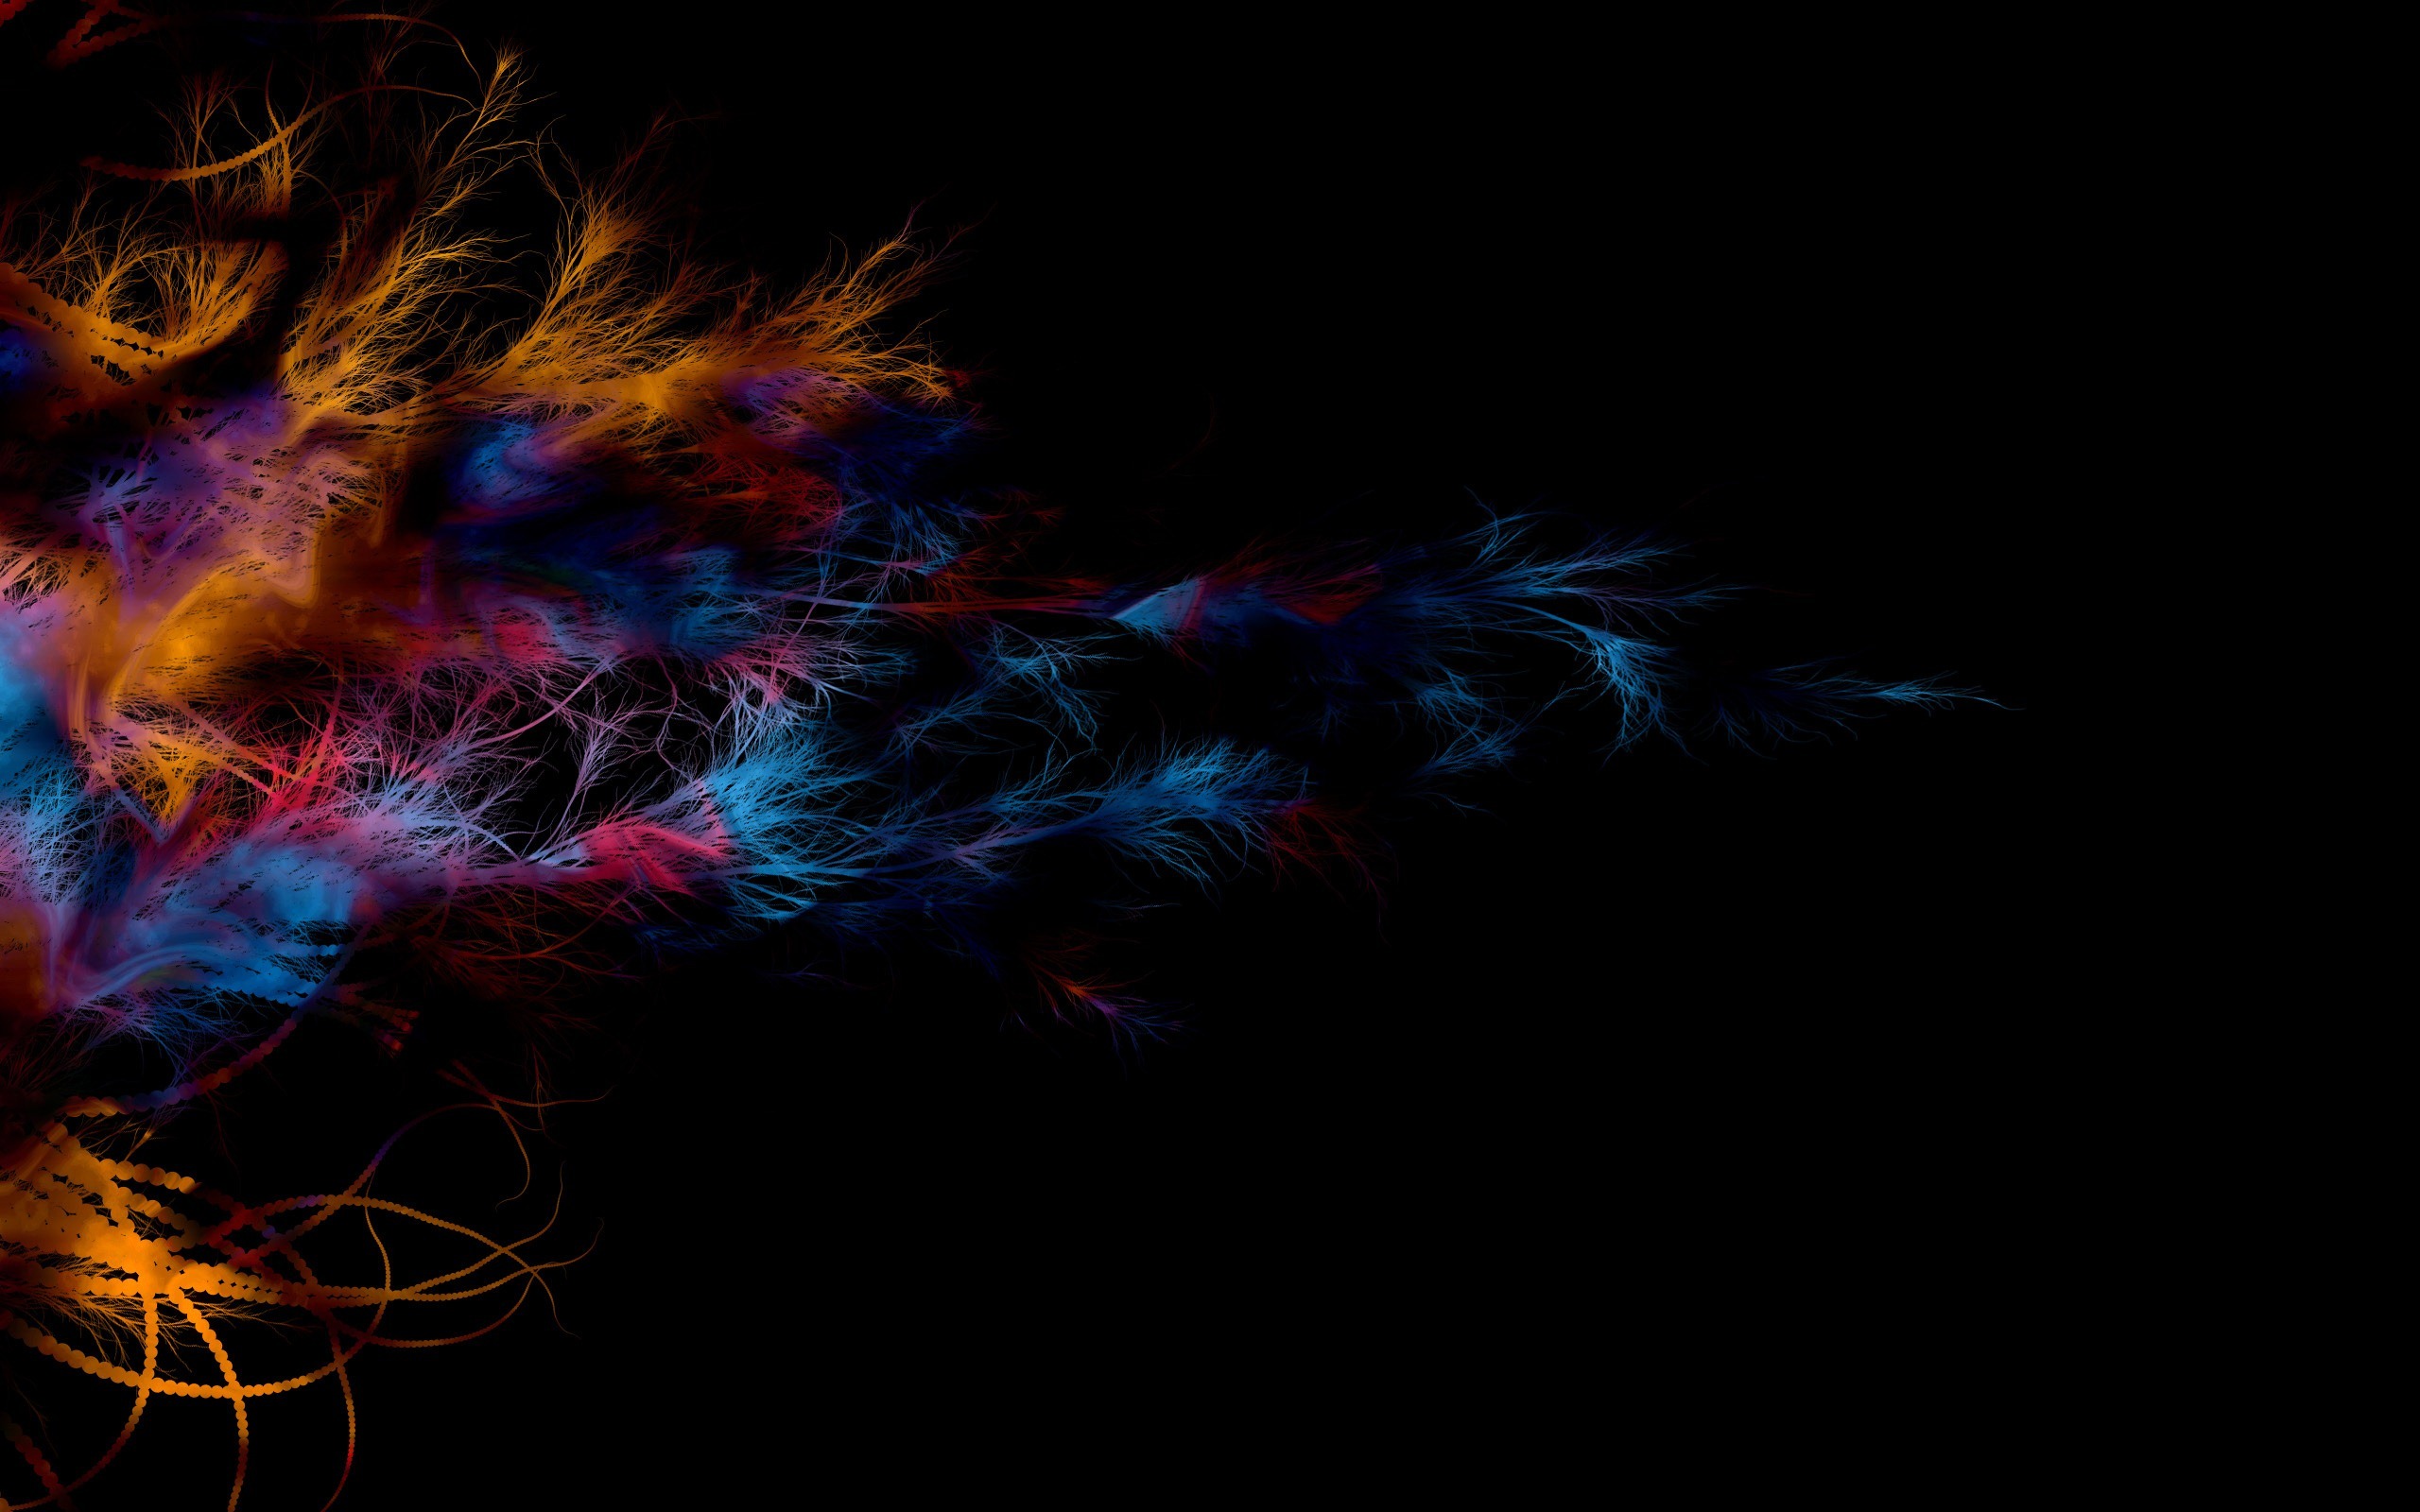 59 Amazing 3D - Abstract HD Wallpapers Up to 5K [Set 2]